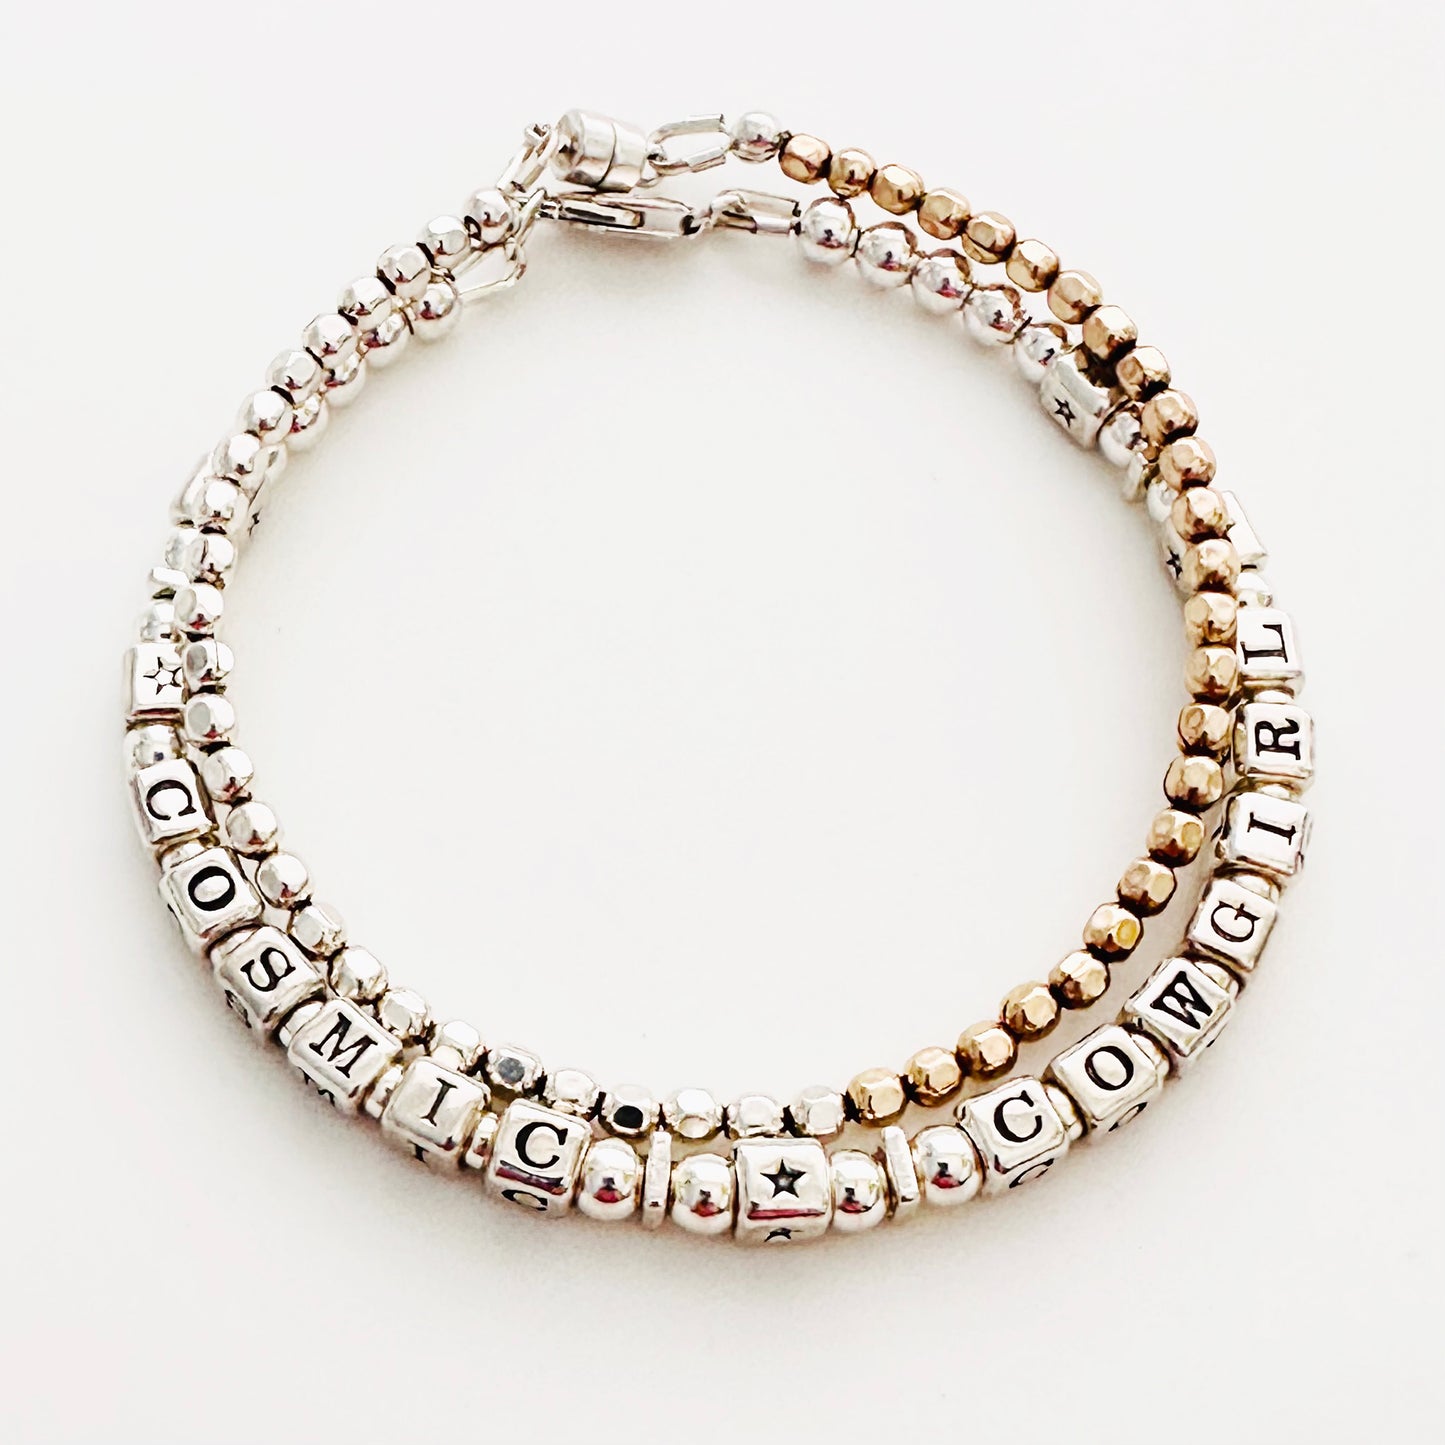 Cosmic Cowgirl Sterling silver engraved message bracelet shown with gold and silver mixed metal beaded bracelet